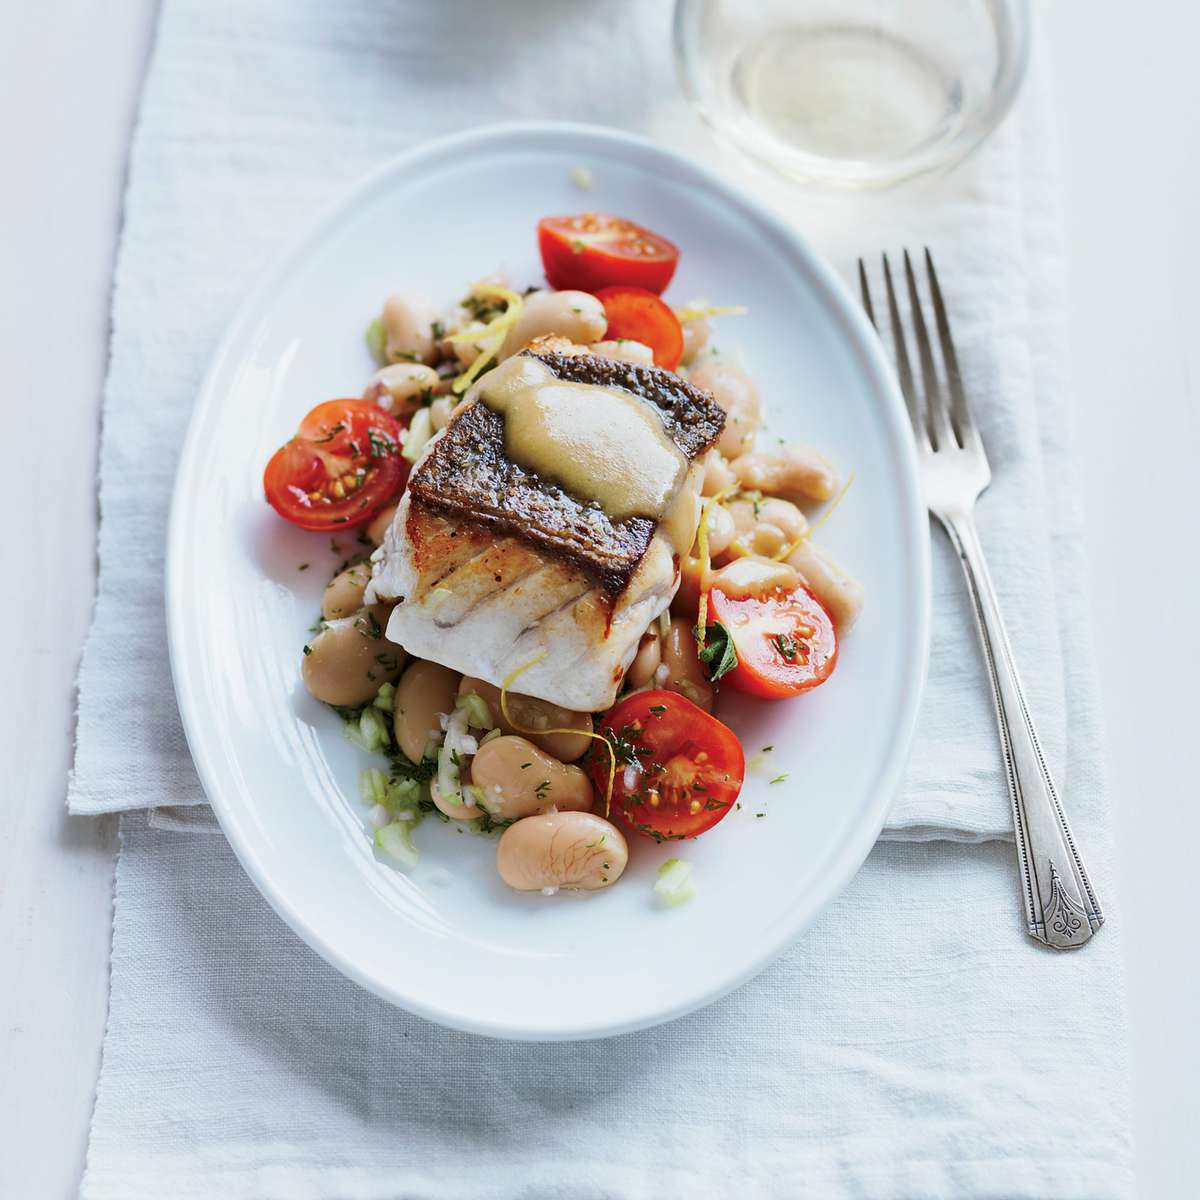 Pan-Roasted Grouper with Tomato and Butter Bean Salad